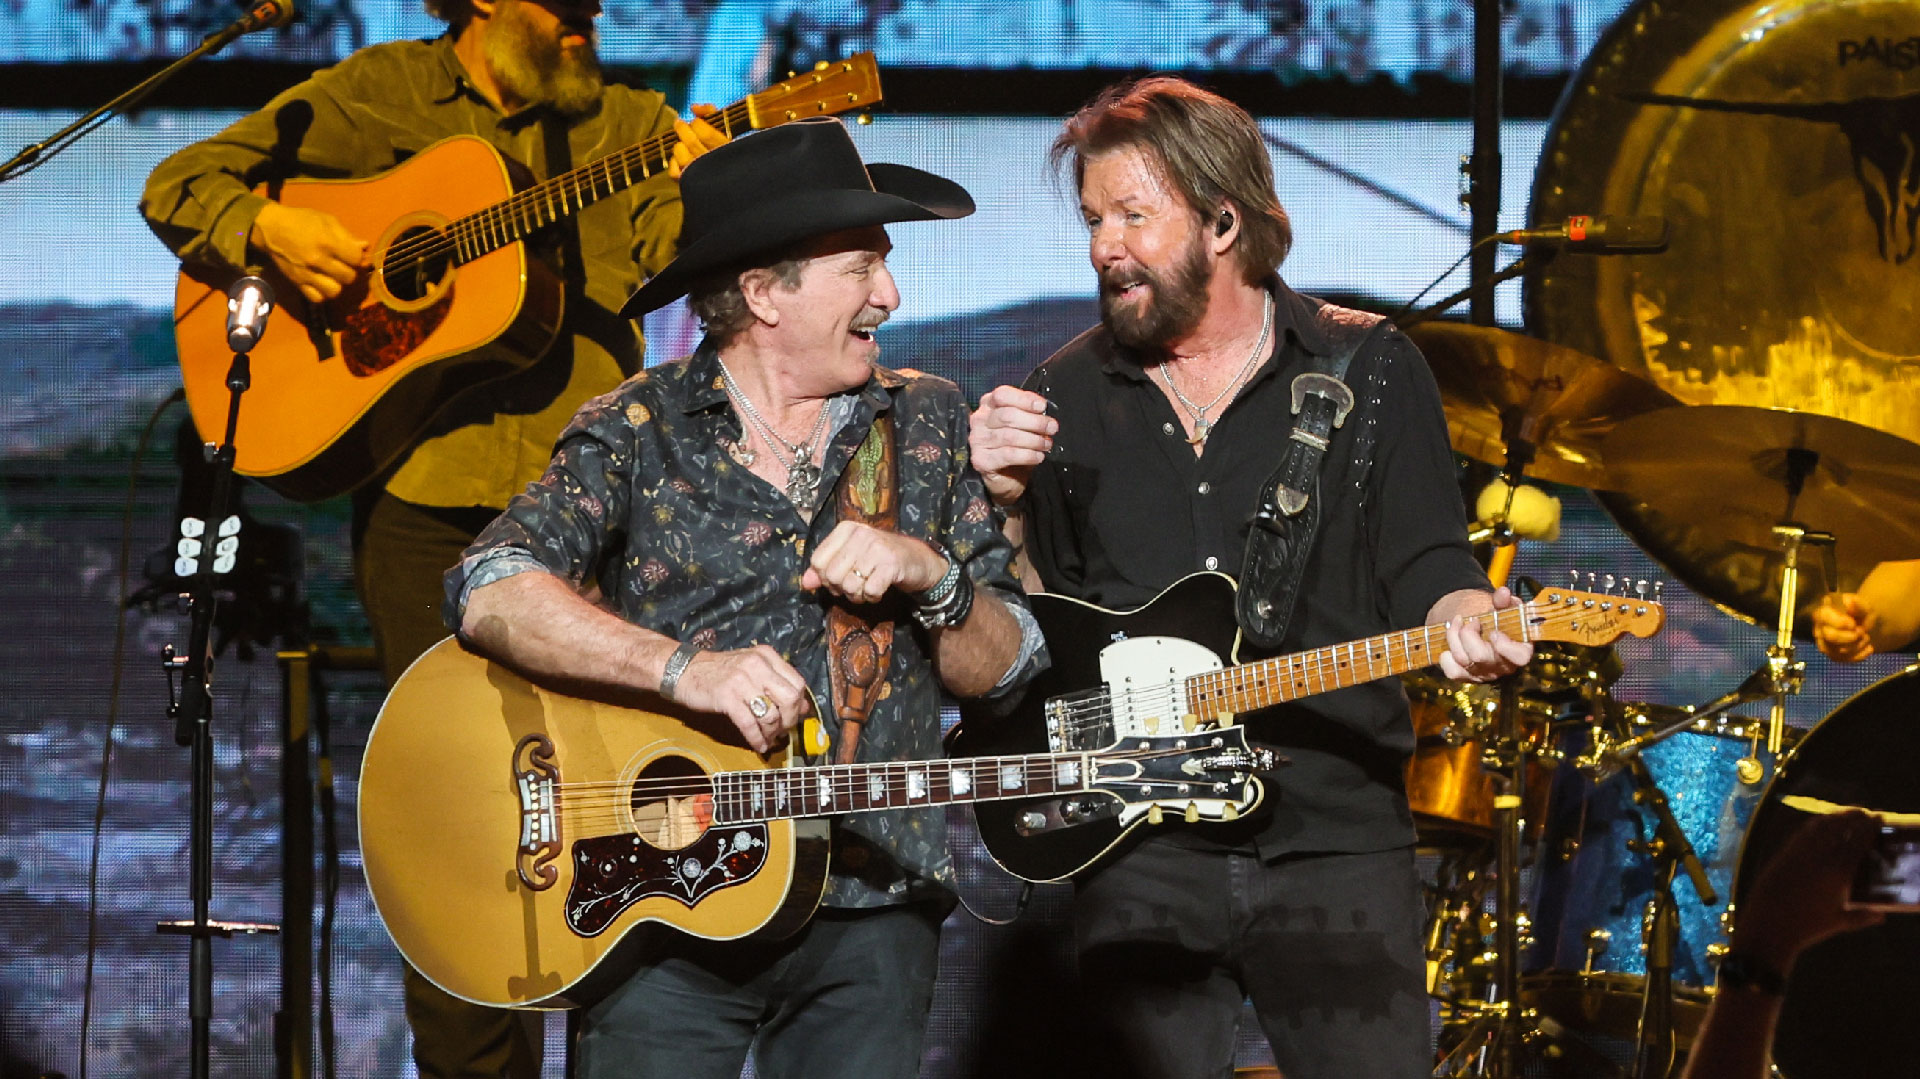 Kix Brooks and Ronnie Dunn of Brooks & Dunn perform during the Reboot 2022 Tour at Bridgestone Arena on June 18, 2022 in Nashville, Tennessee.